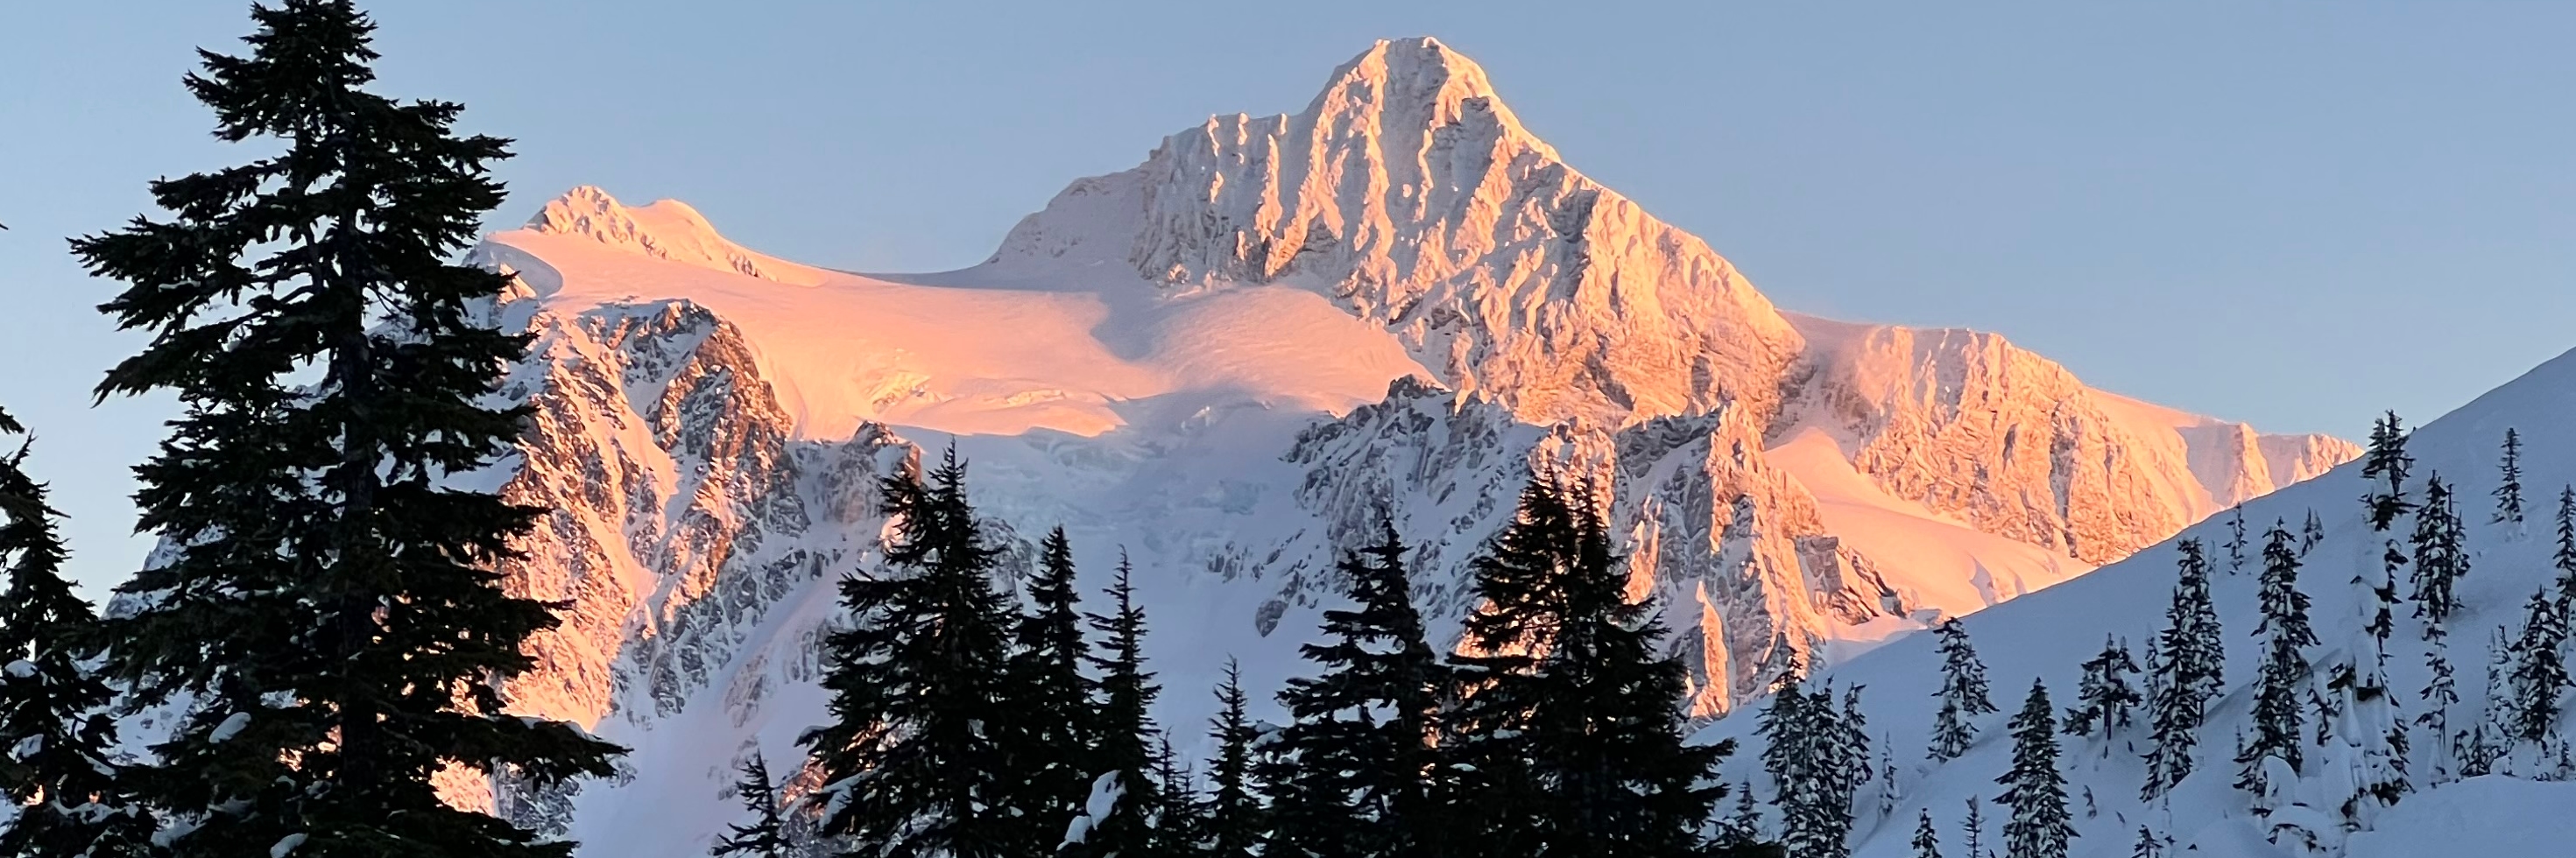 Shuksan at Sunset in the Winter